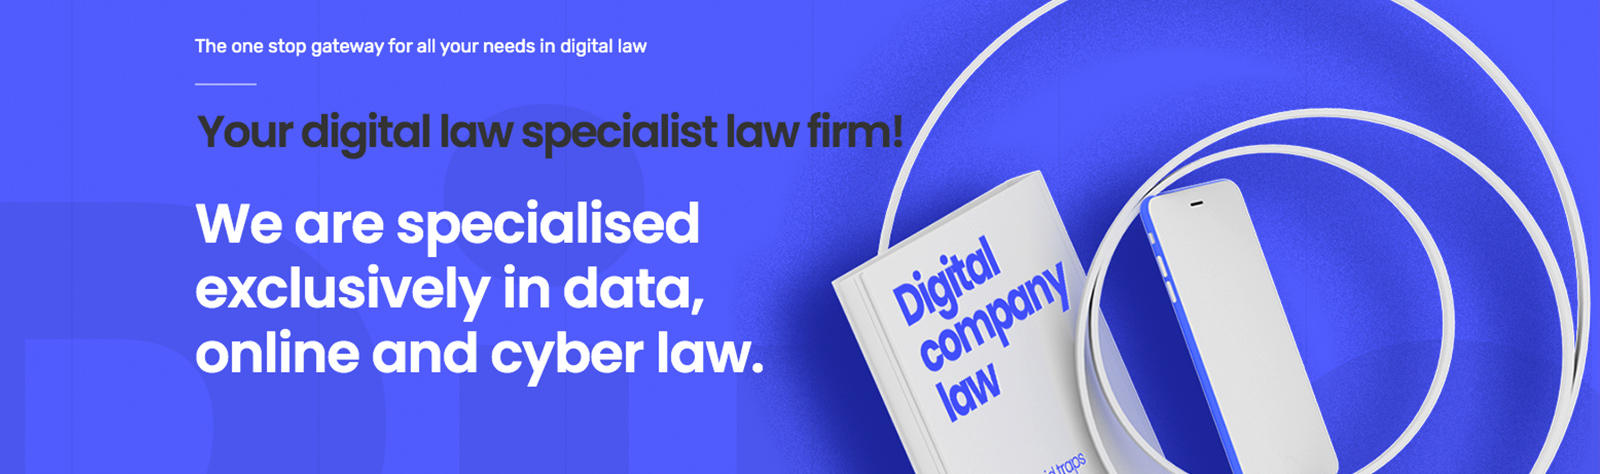 Pimlegal was created in 2018 and composed of a team of expert lawyers who understand technology.